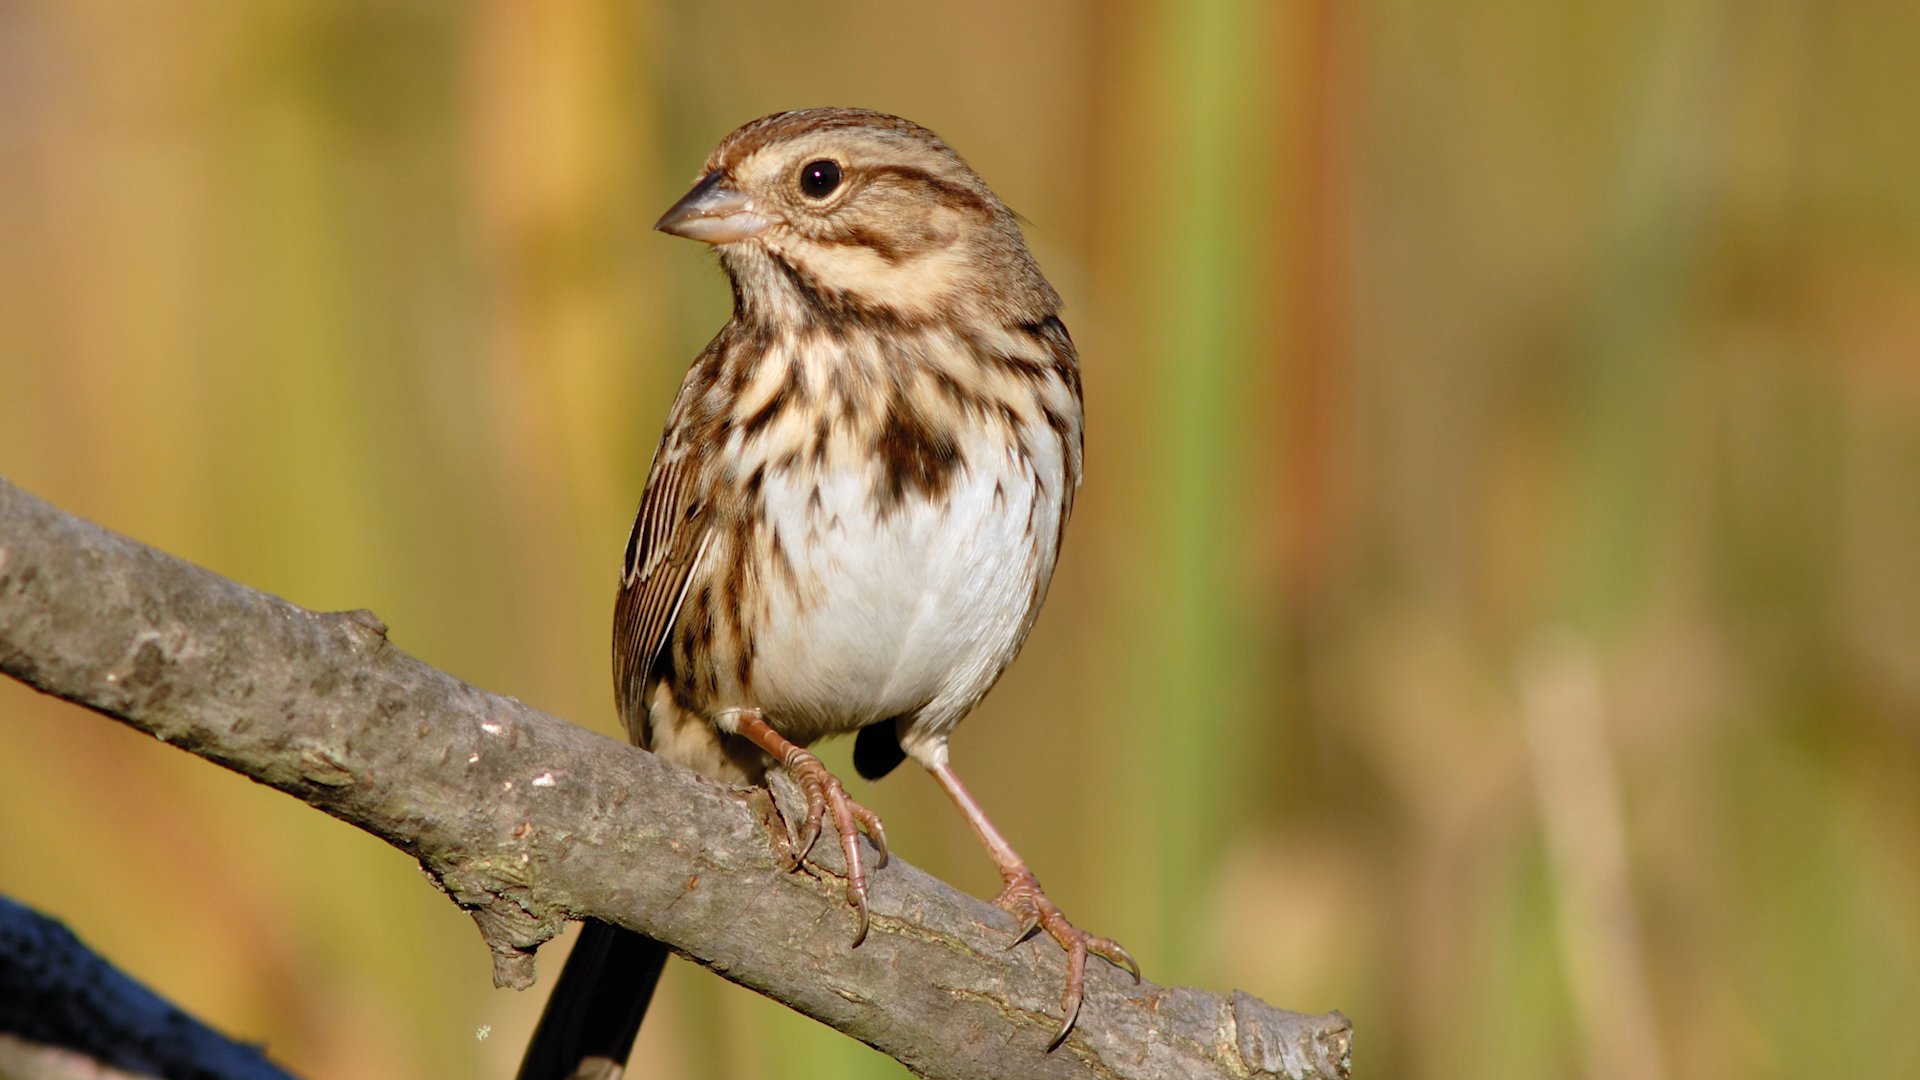 SOUTHERN SWAMP SPARROW reproduction and development